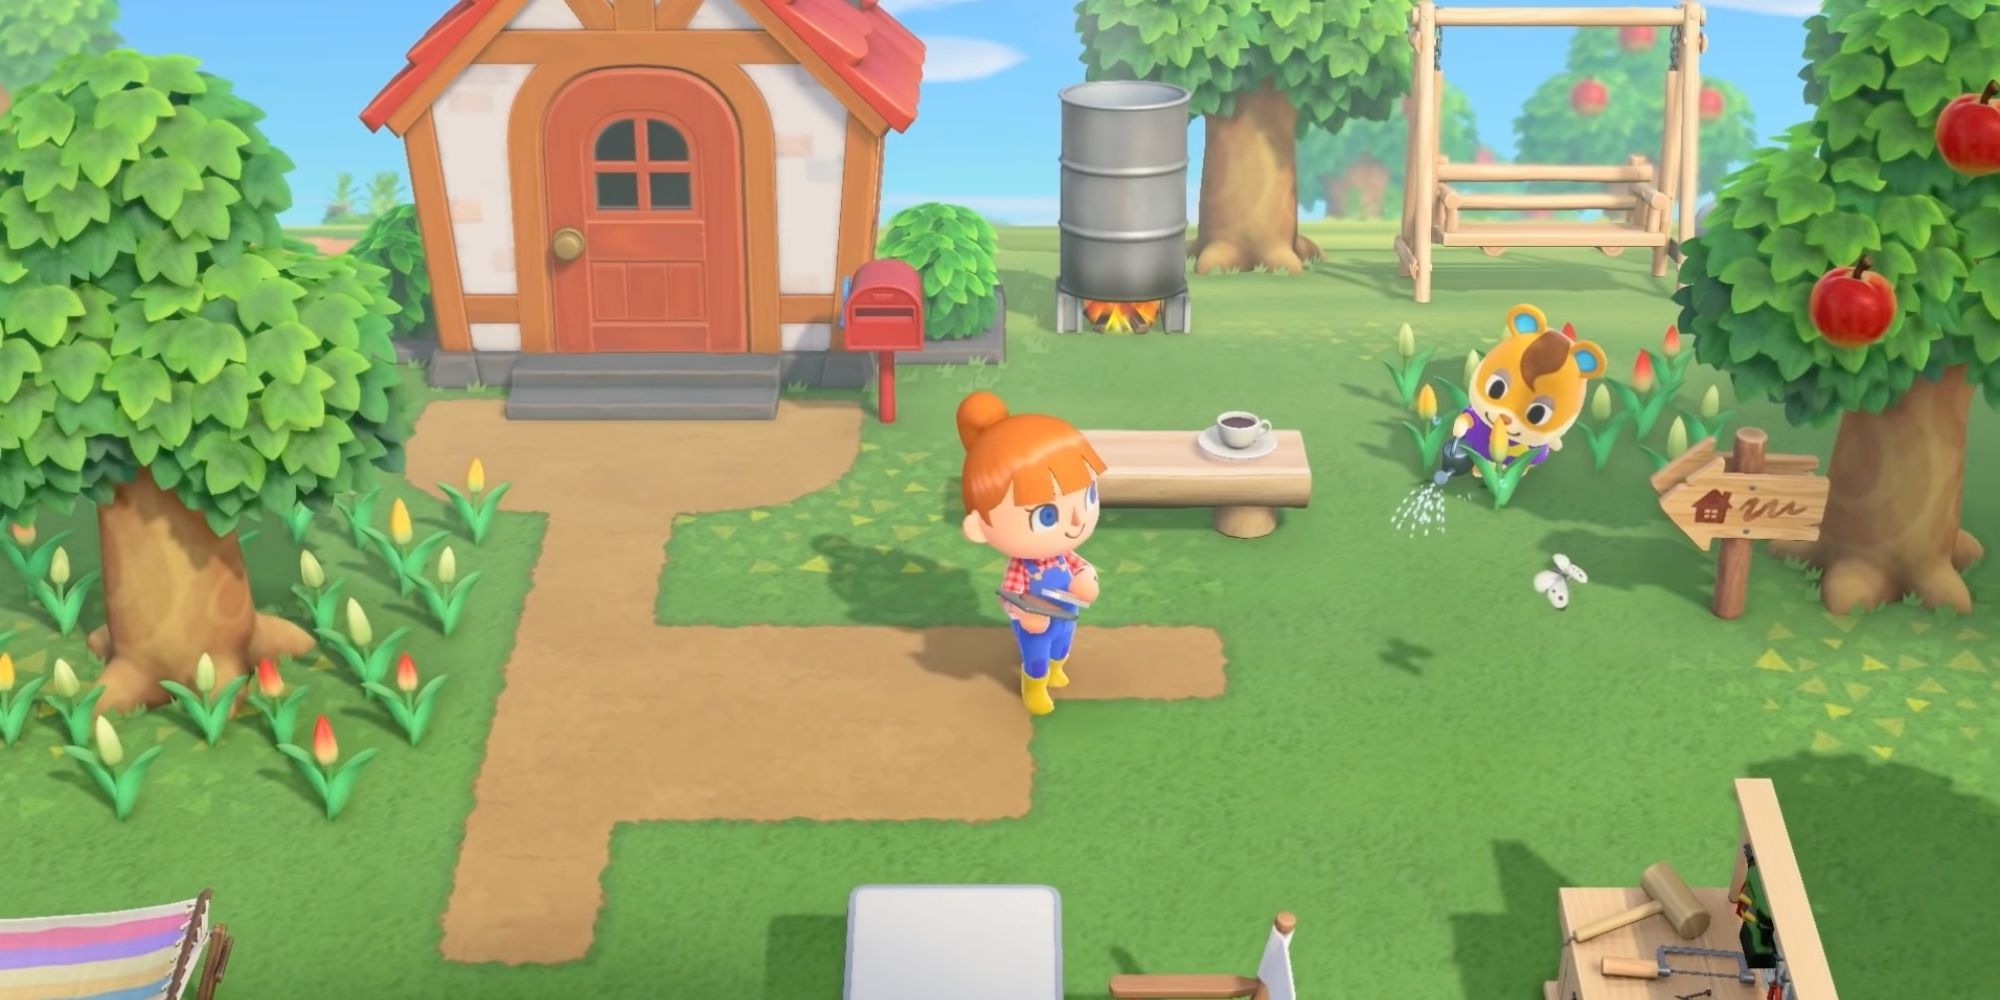 The villager player character from Animal Crossing New Horizons standing outside their home, laying a path using terraforming. Hamlet the Hamster Villager is watering plants in the background.